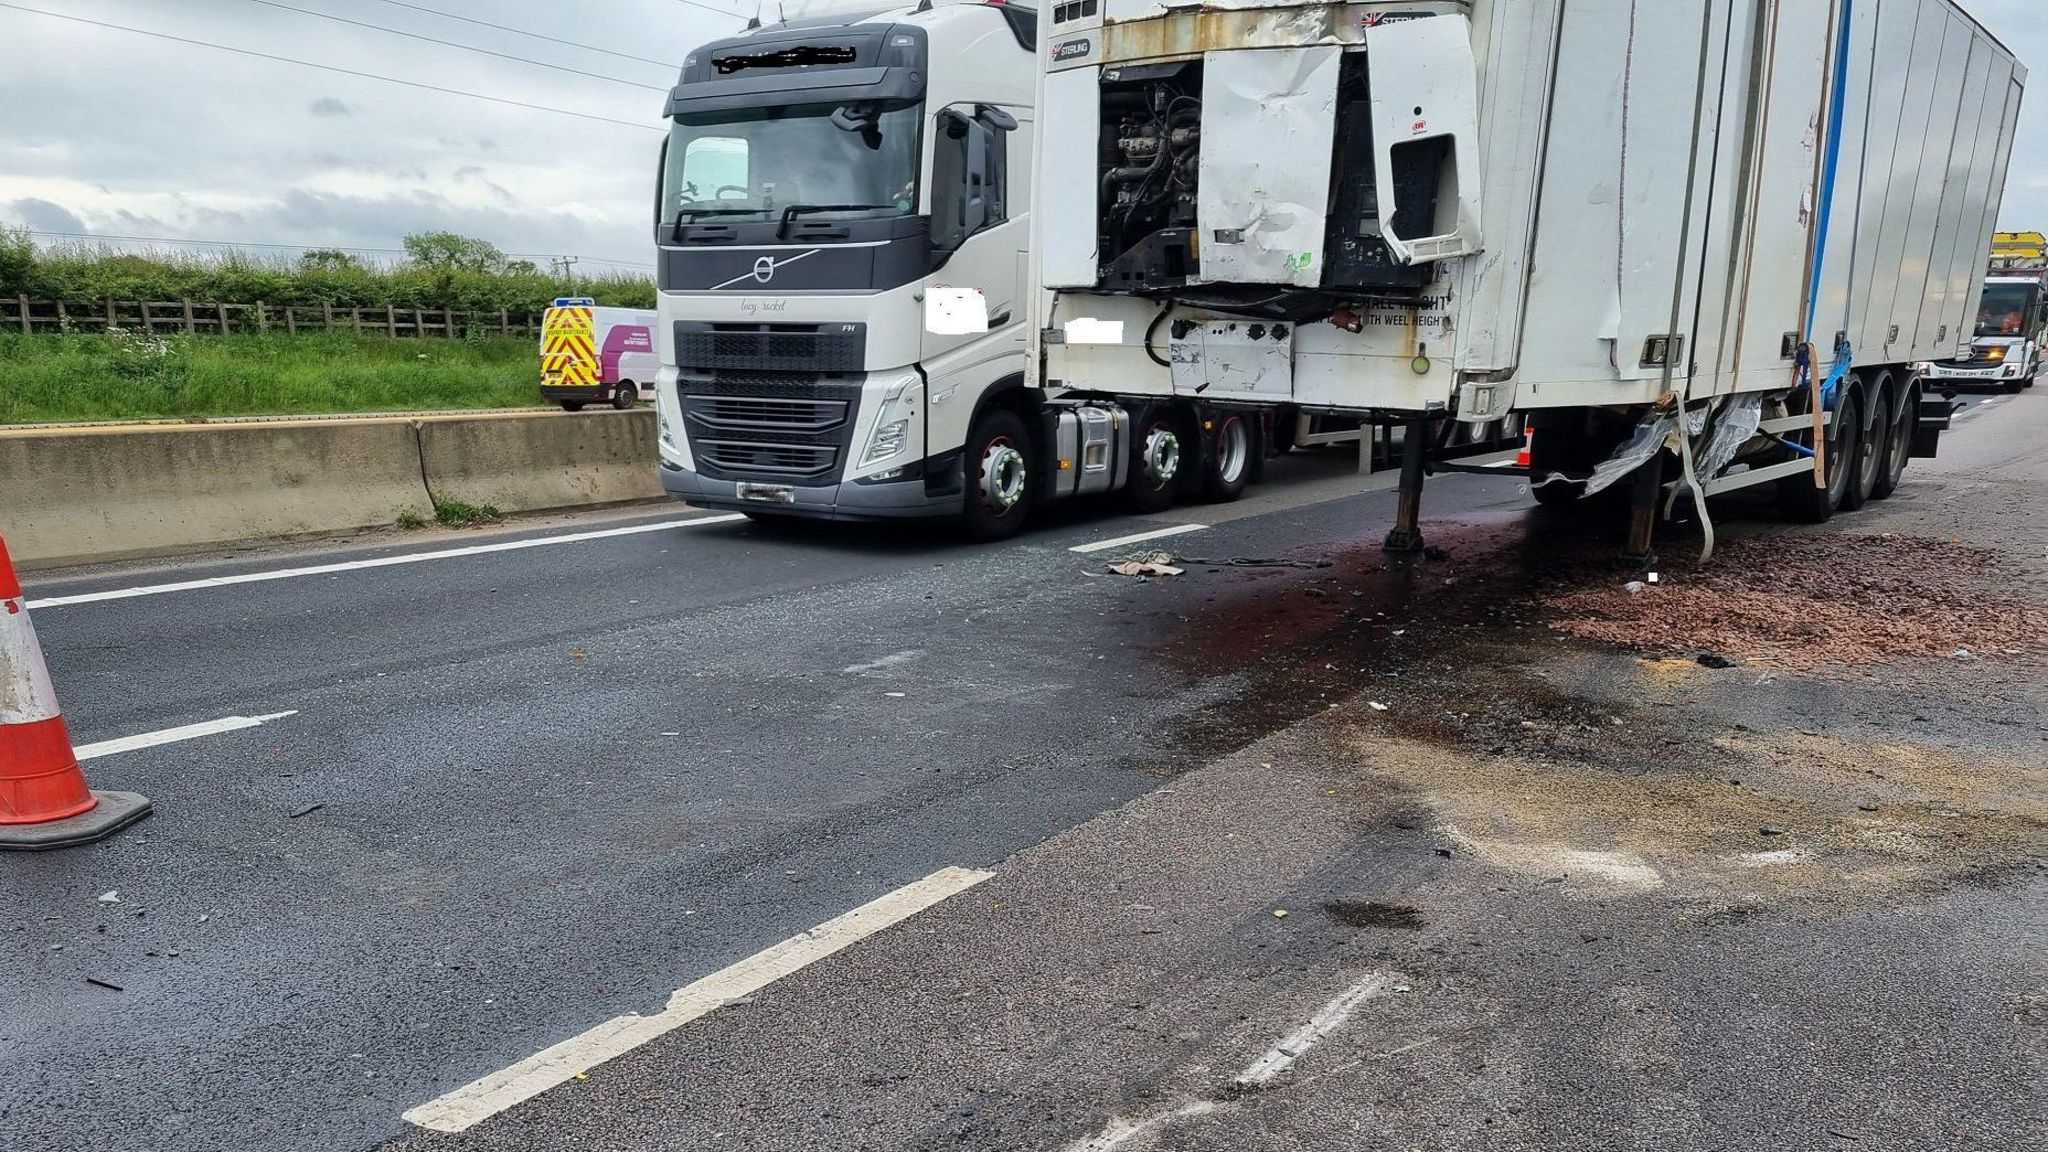 The large white lorry is seen from the front and there is debris on the tarmac